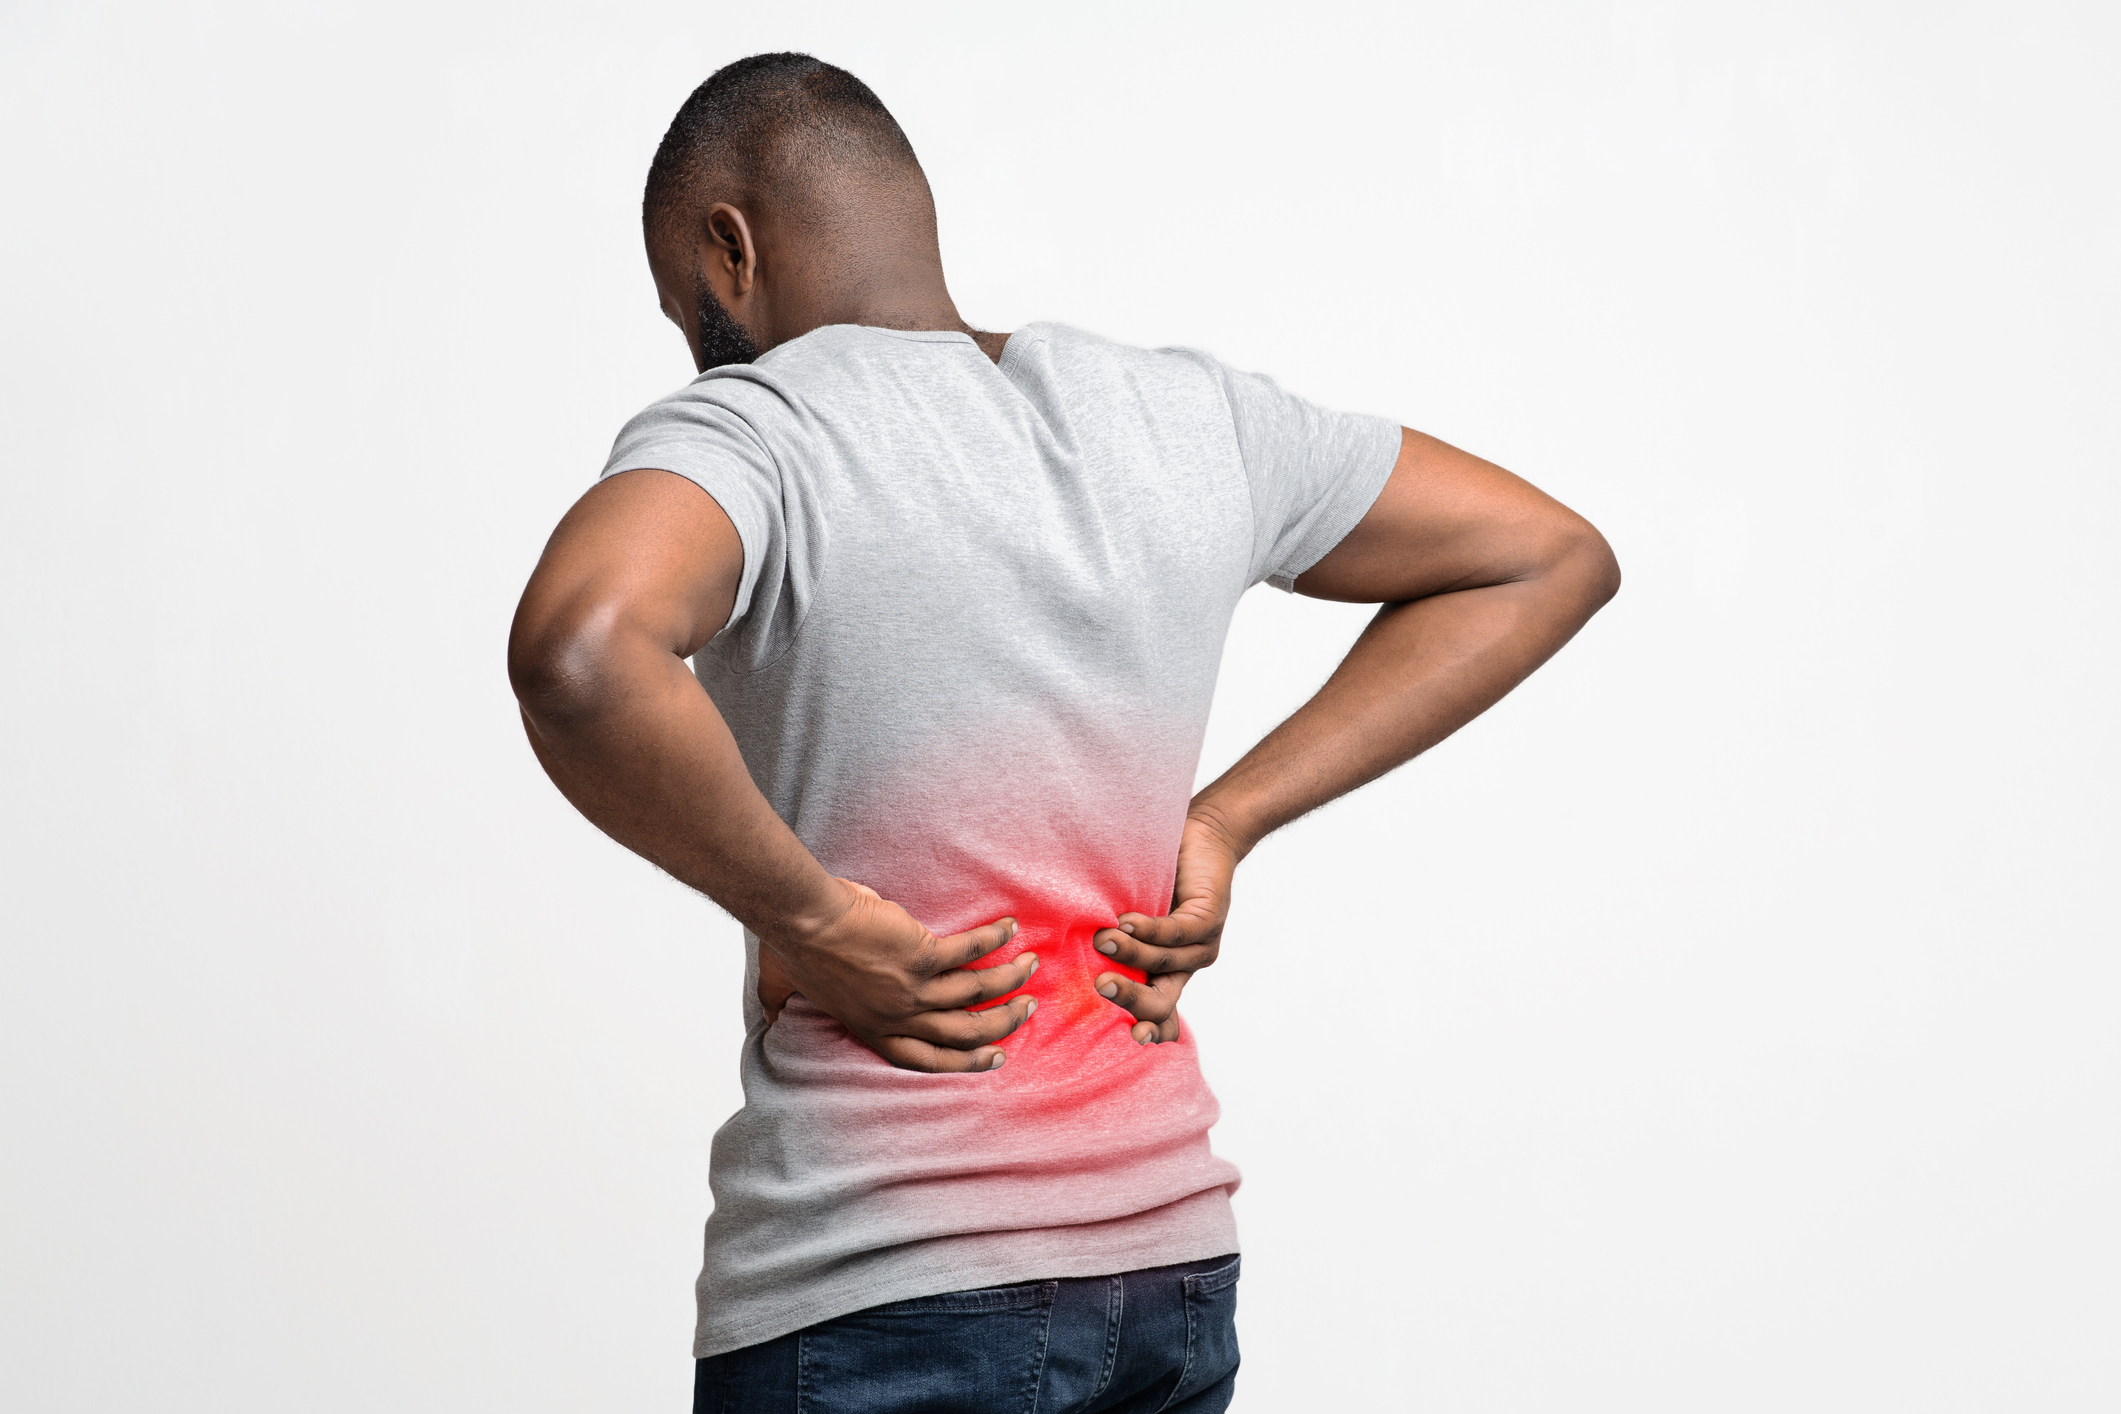 Ways to Fix Your Back Pain